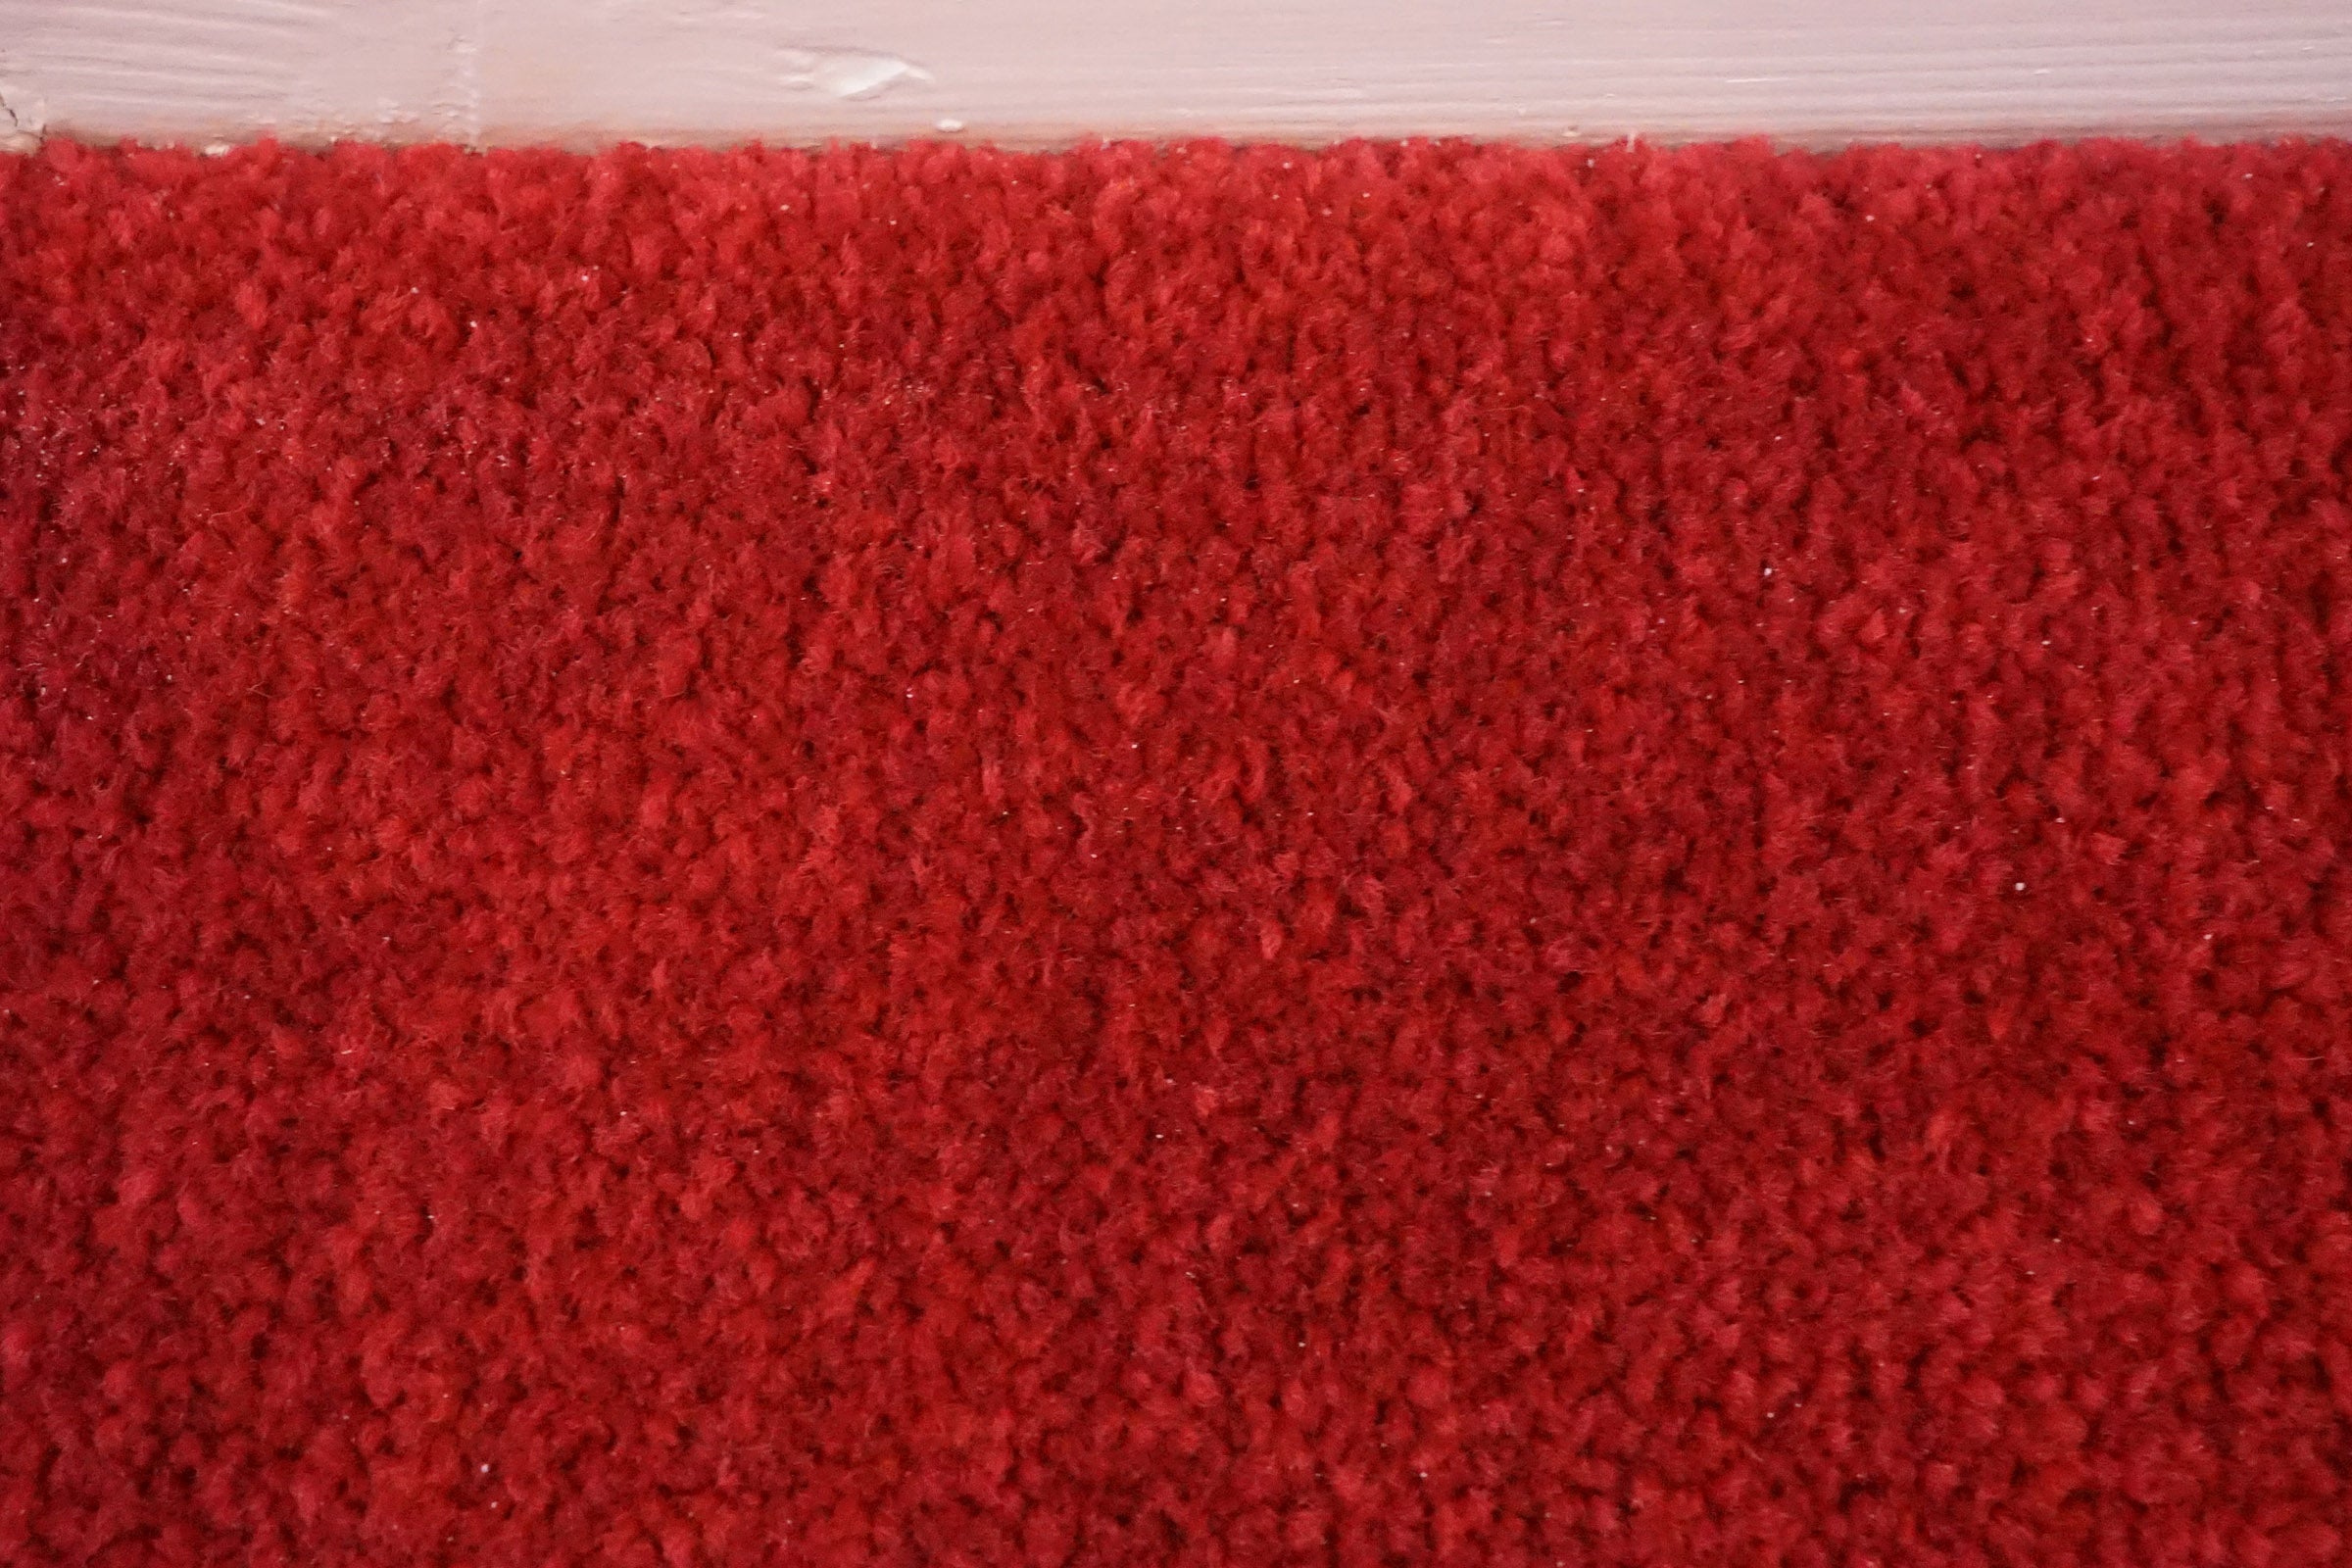 Close-up texture of red carpet flooringCarpet with clean and dirty halves demonstrating vacuum cleaner efficacy.